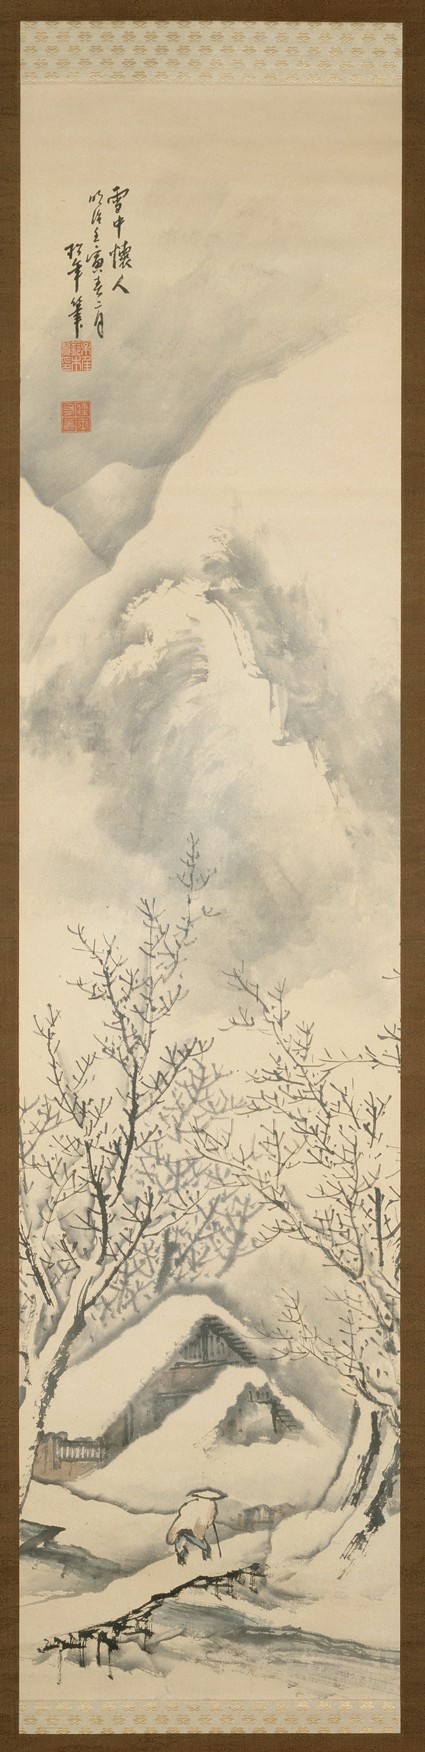 Snowscape depicting a man walking towards a hermitagefront, painting only